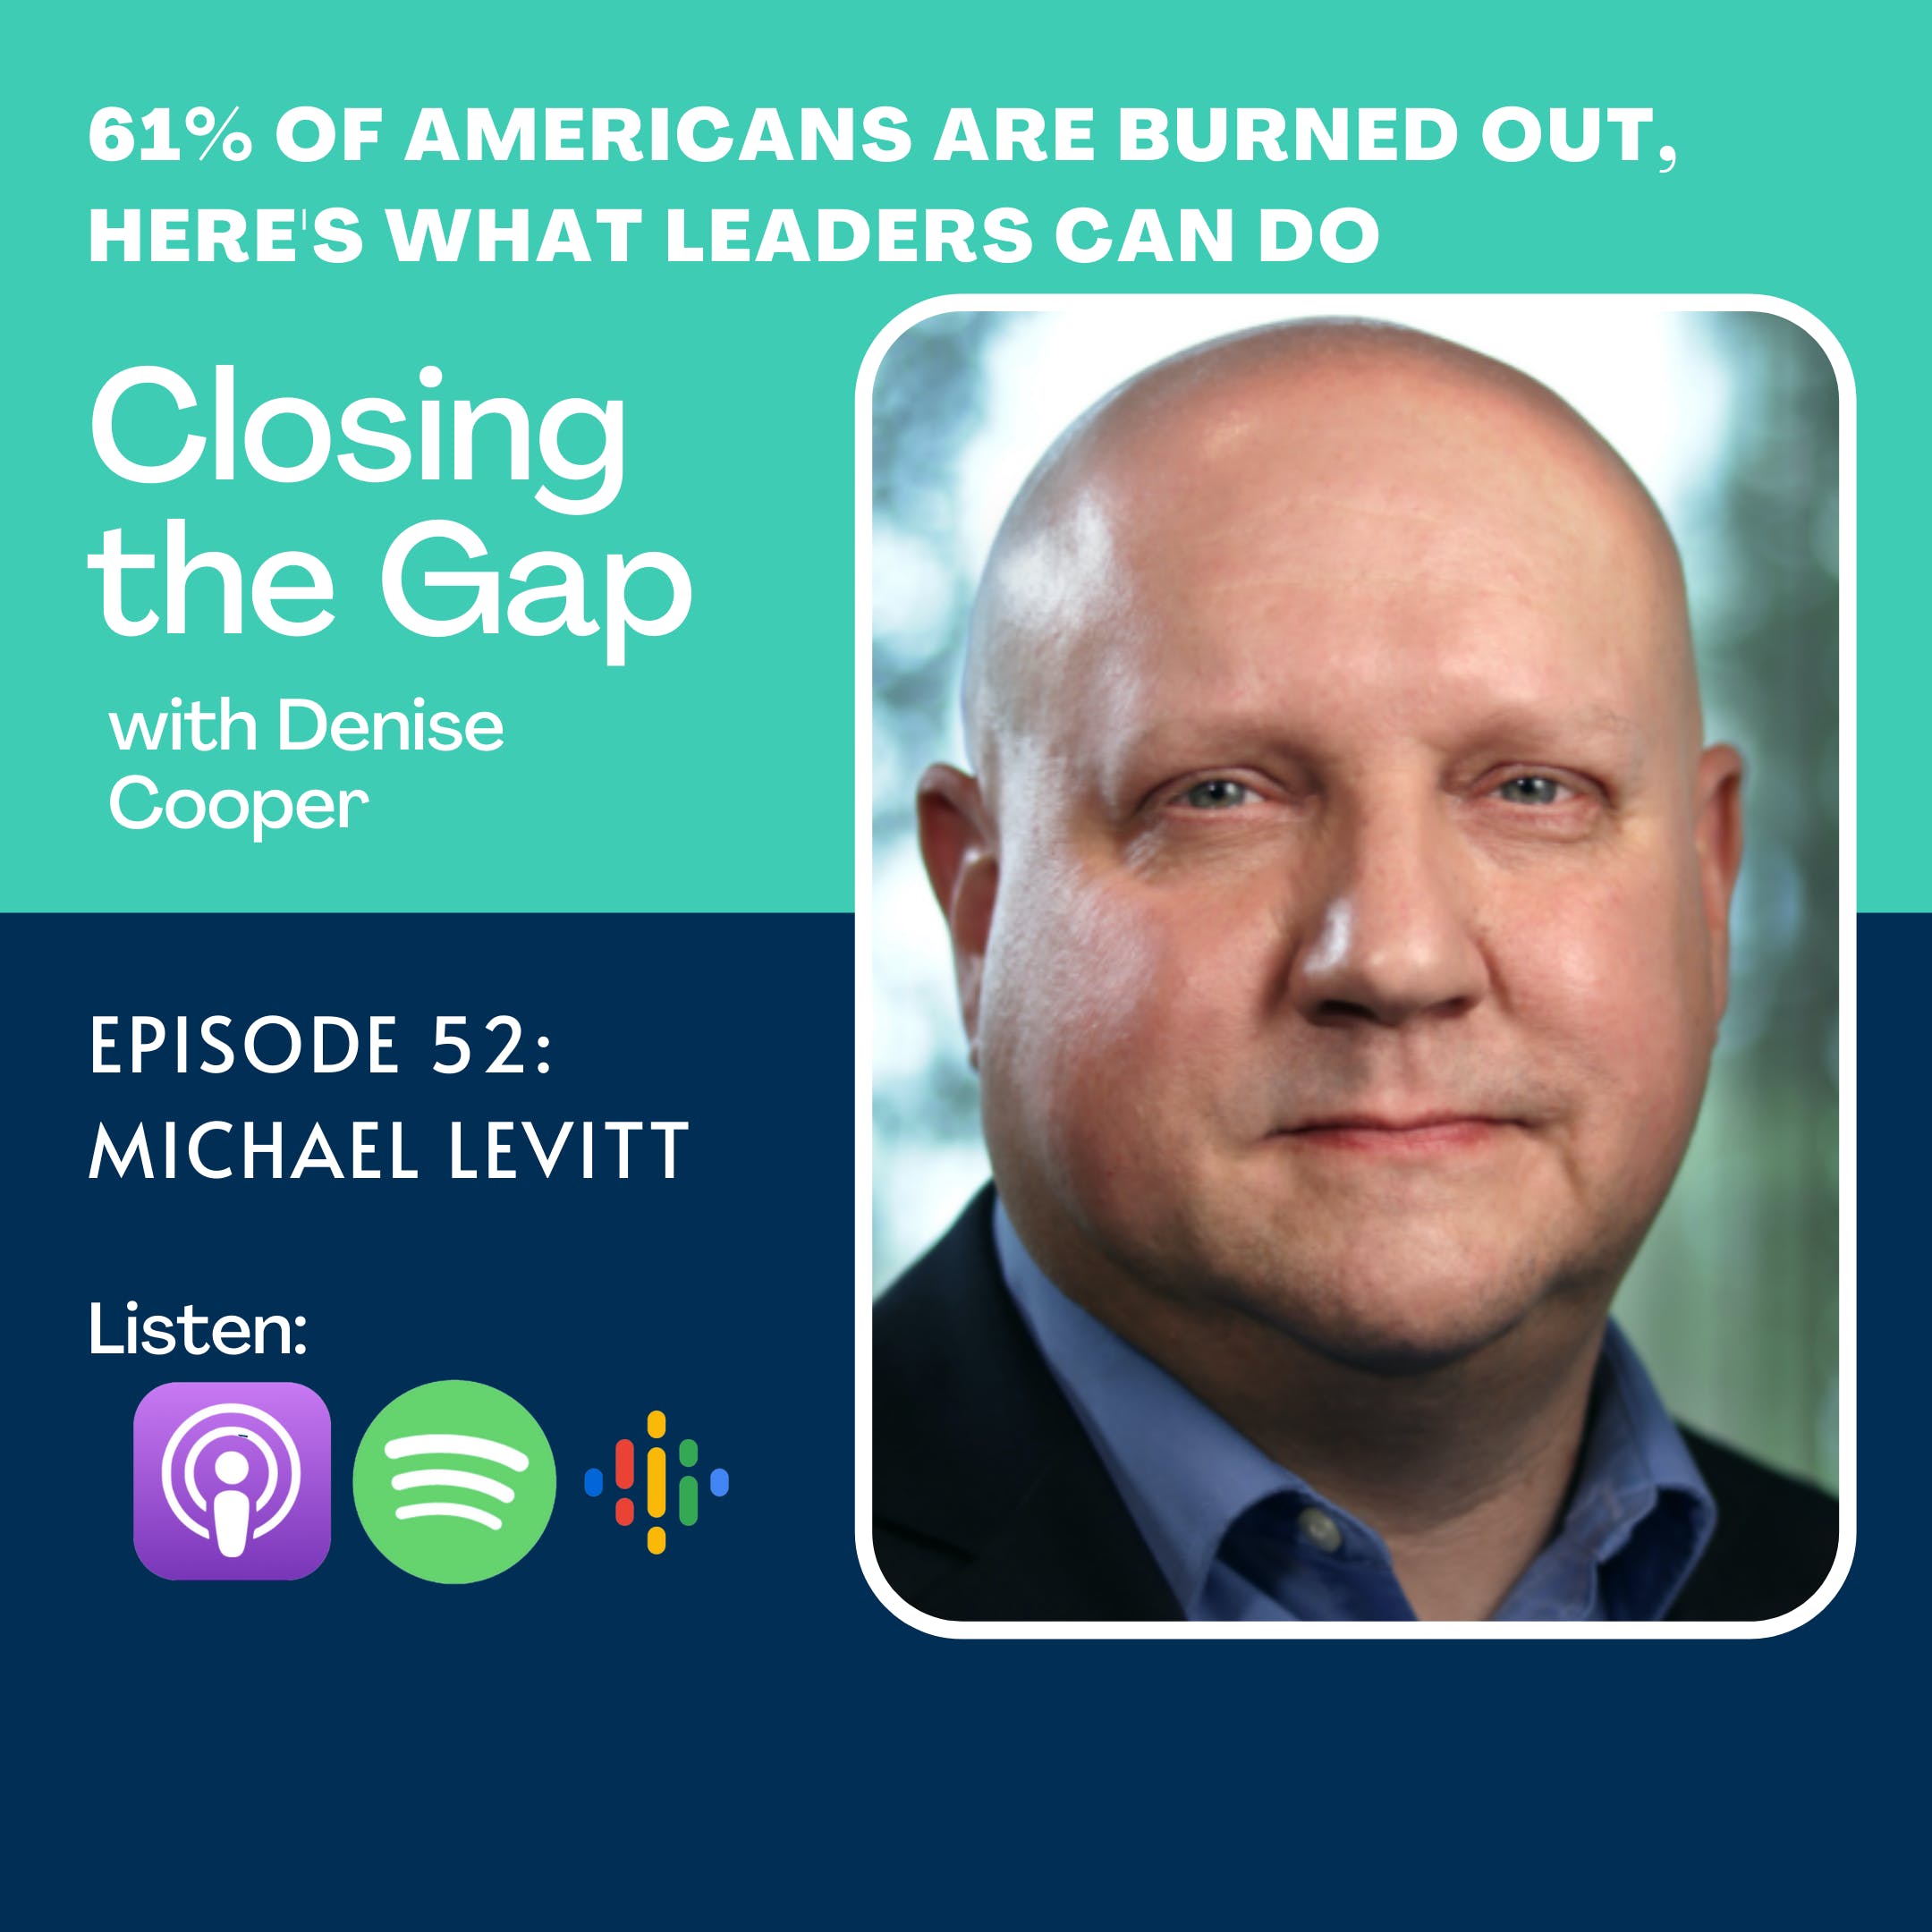 Episode 52: 61% are burned out. What can leaders do now?